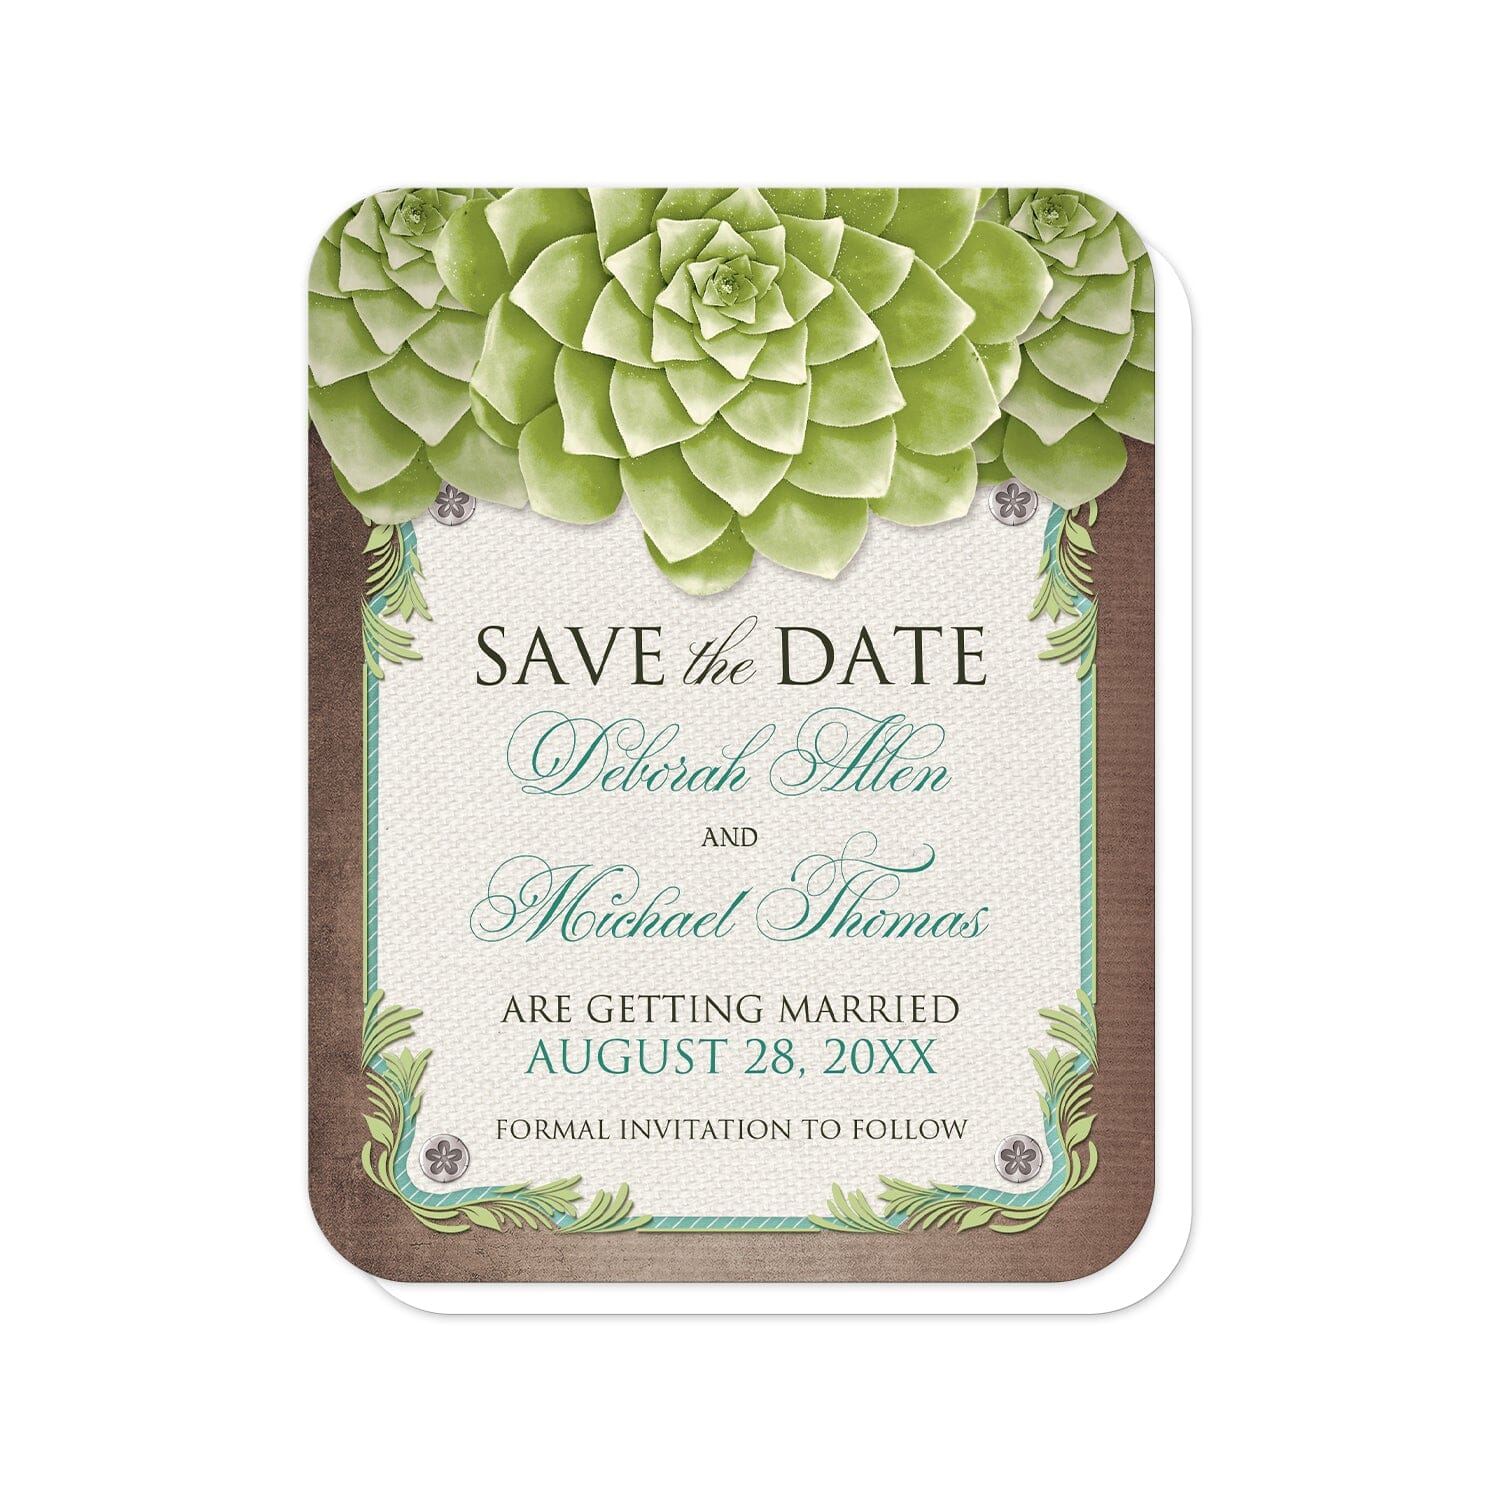 Rustic Succulent Garden Save the Date Cards (with rounded corners) at Artistically Invited. Designed with three large and lovely green succulents along the top over a beige canvas texture illustration framed with a leafy green decorative border, striped teal, and four floral metal pin illustrations, all over a brown background along the edges. Your personalized wedding date details are custom printed in brown and teal over the beige canvas background in the center area below the succulents.